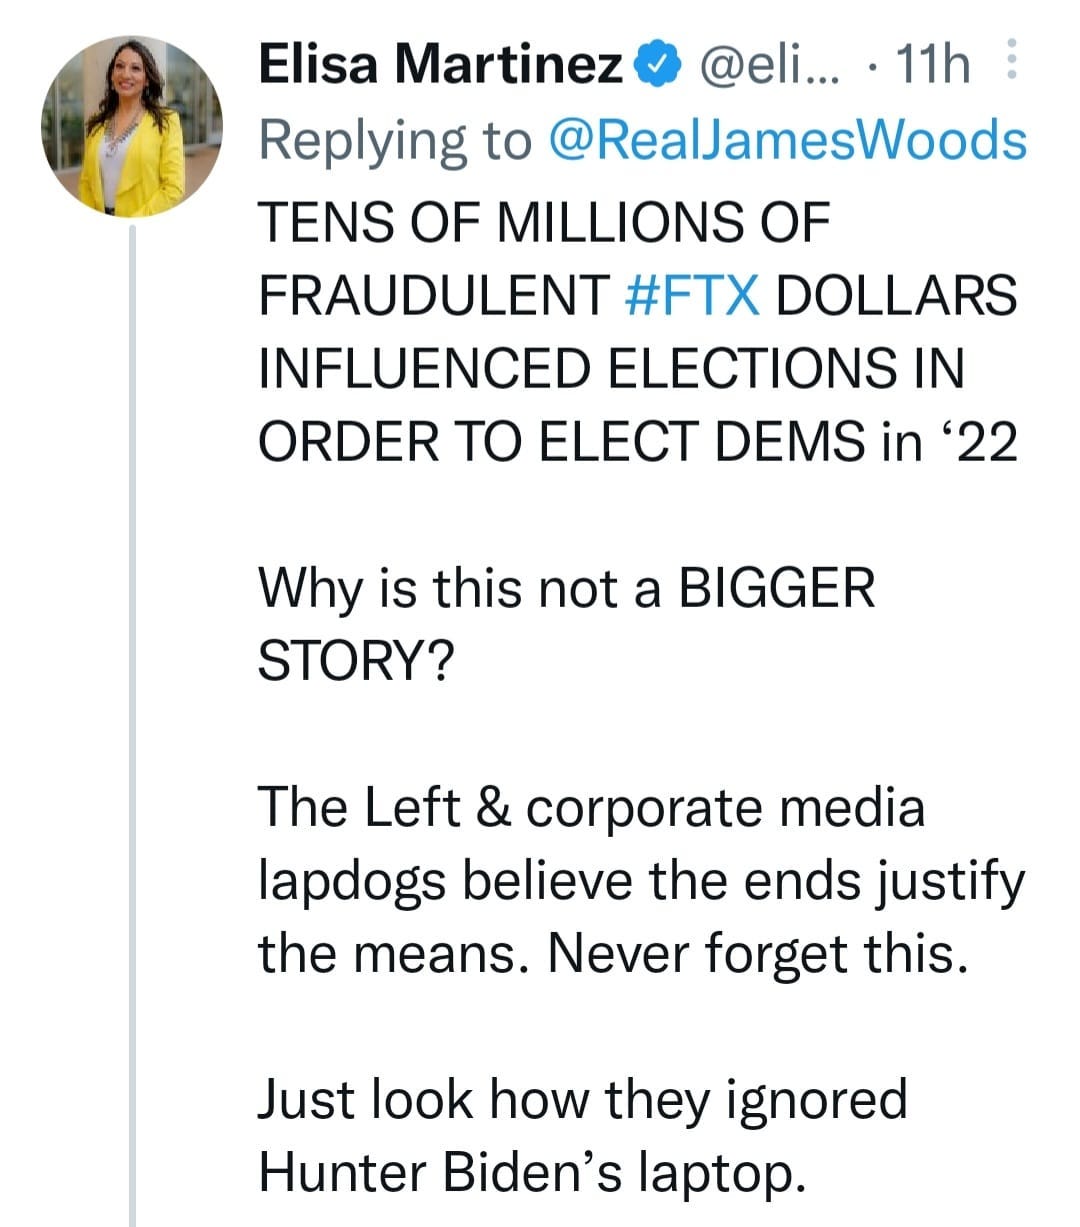 May be a Twitter screenshot of 1 person and text that says 'Elisa Martinez @eli... 11h Replying to @RealJamesWoods TENS OF MILLIONS OF FRAUDULENT #FTX DOLLARS INFLUENCED ELECTIONS IN ORDER TO ELECT DEMS in 22 Why is this not a BIGGER STORY? The Left & corporate media lapdogs believe the ends justify the means. Never forget this. Just look how they ignored Hunter Biden's laptop.'